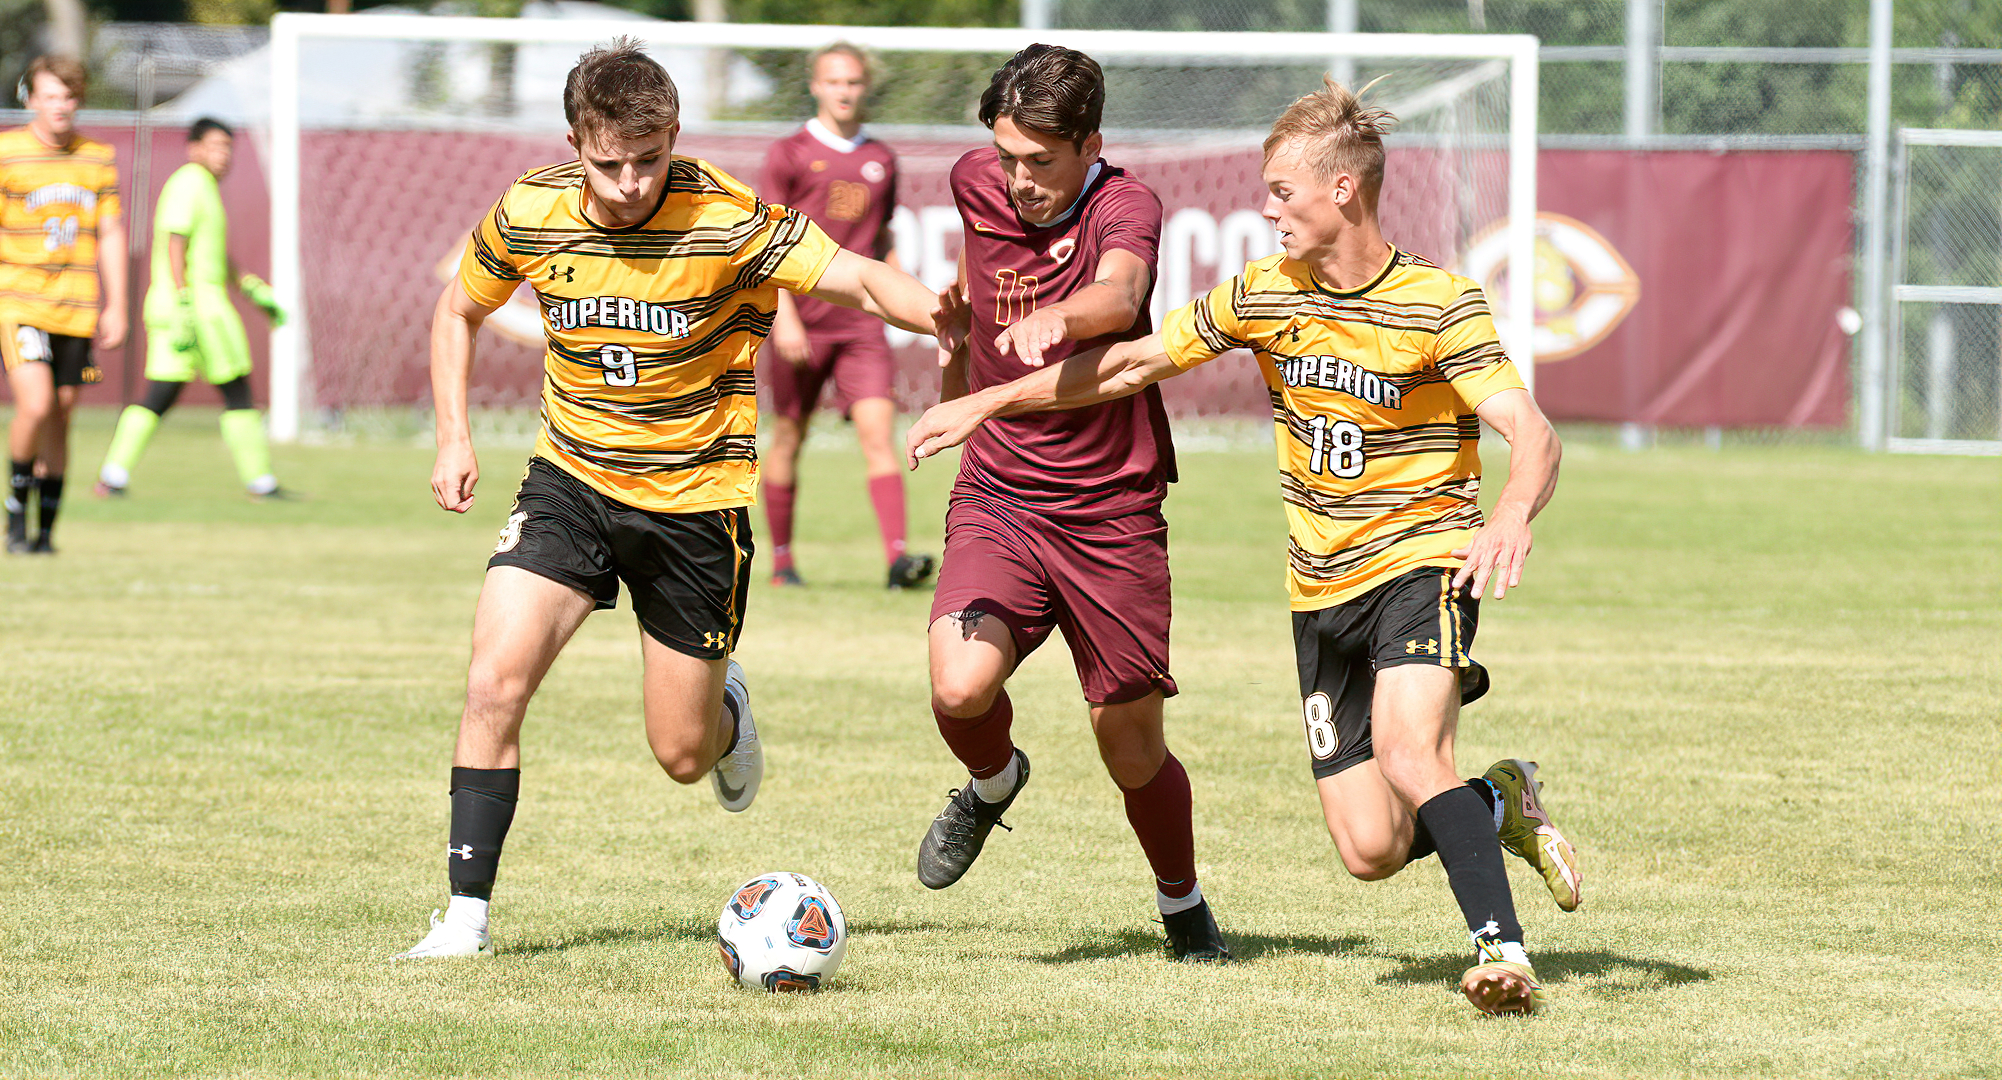 Senior Nate Weaver breaks through the UW-Superior defense in the second half of the Cobbers' game with the Yellowjackets.